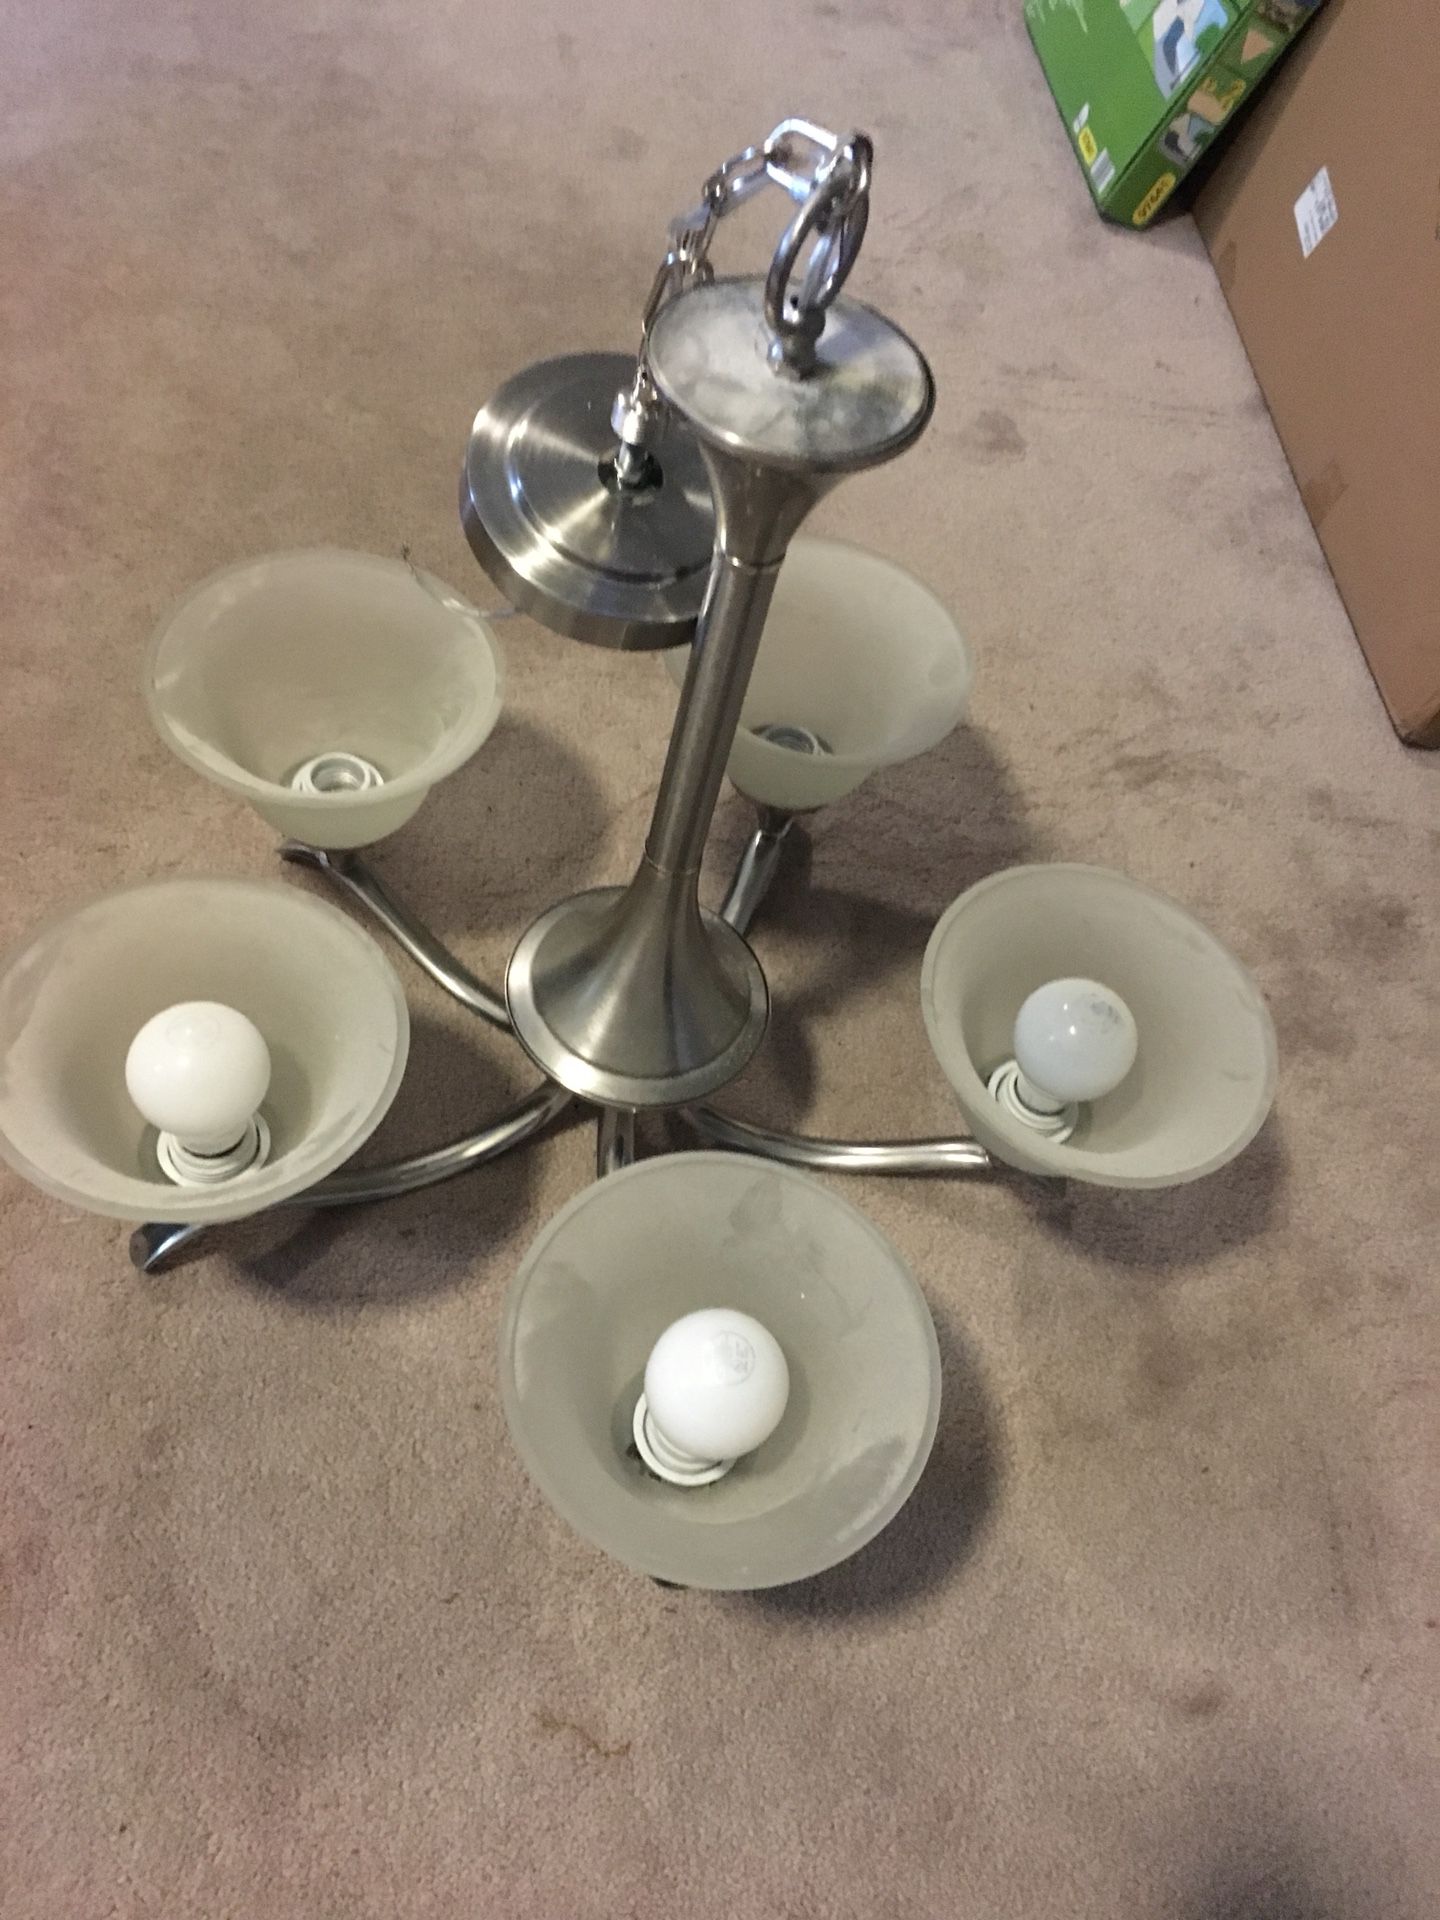 Dining room light fixture from Home Depot